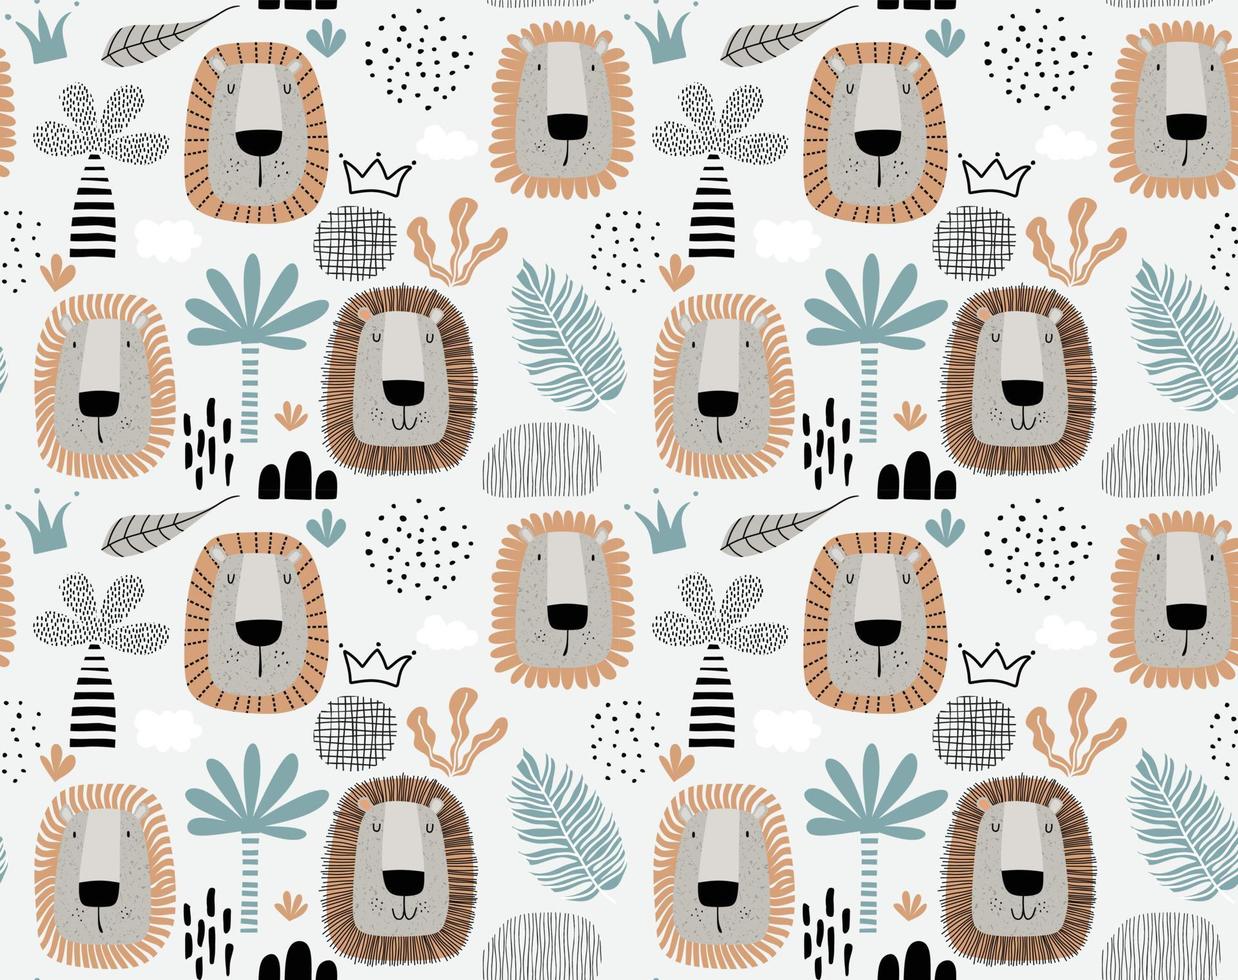 Seamless pattern with cute cartoon lion. vector